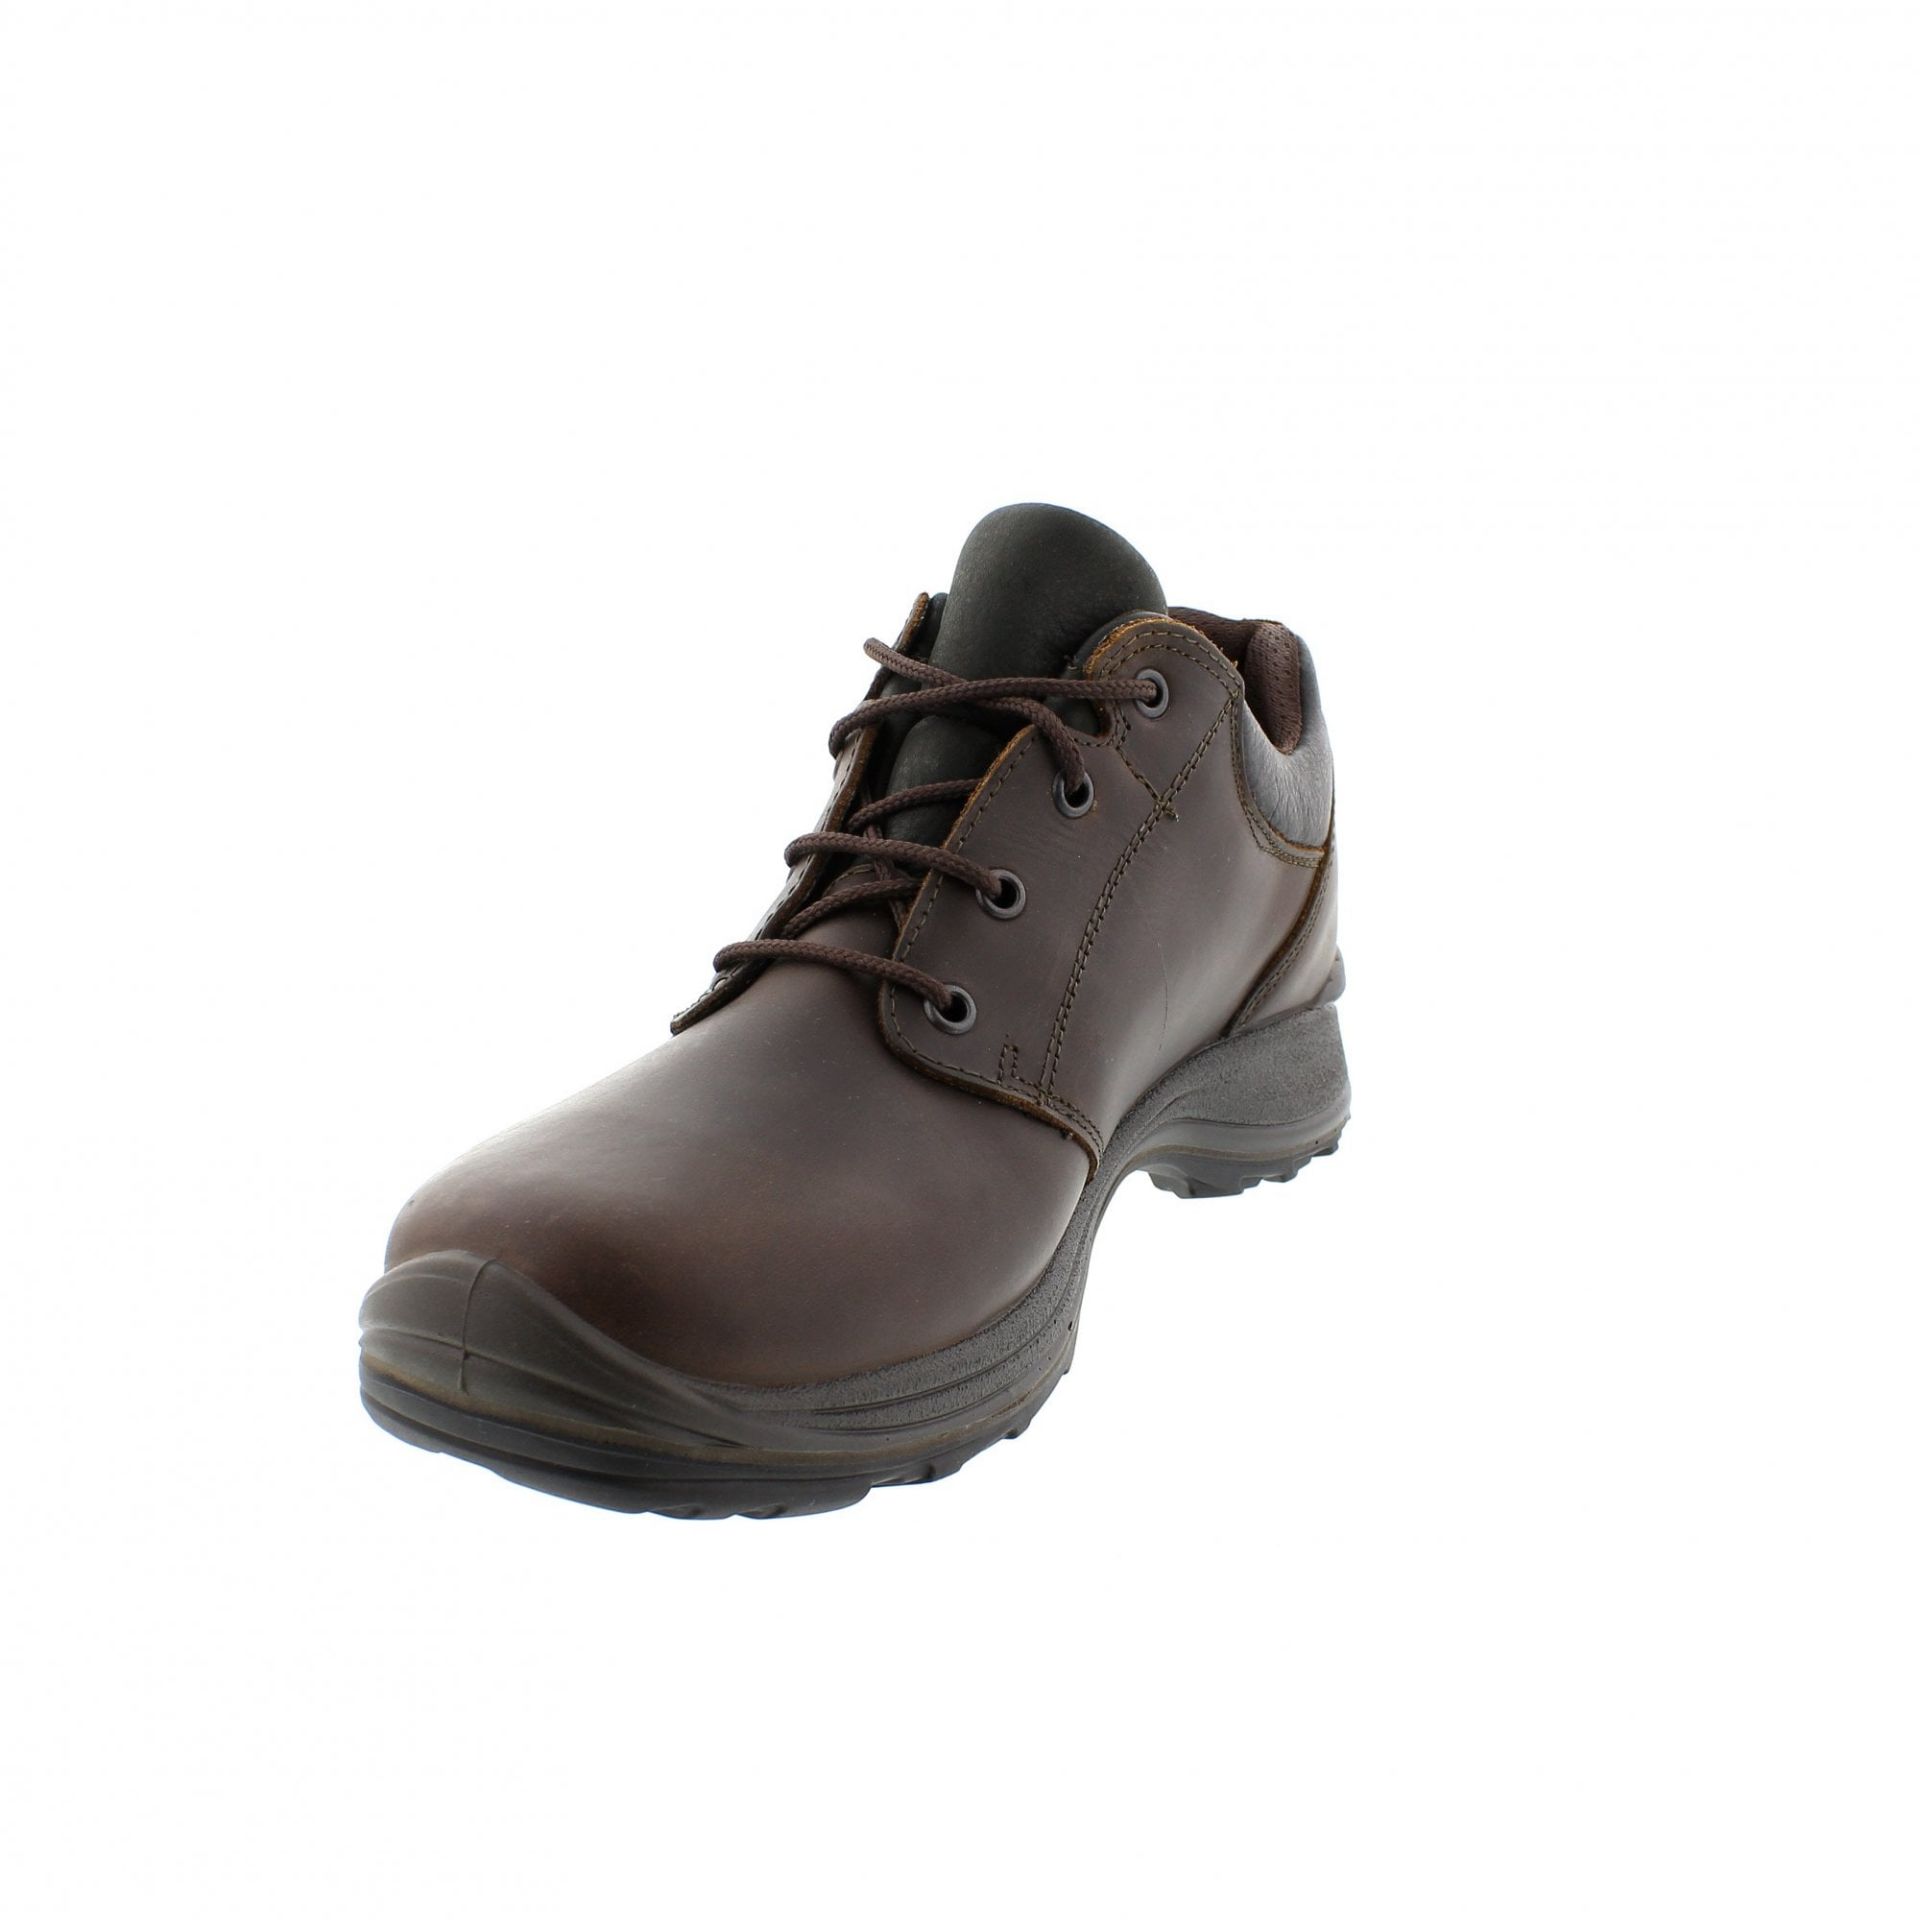 1 x Pair of Men's Grisport Brown Leather GriTex Shoes - Rogerson Footwear - Brand New and Boxed - - Image 8 of 9